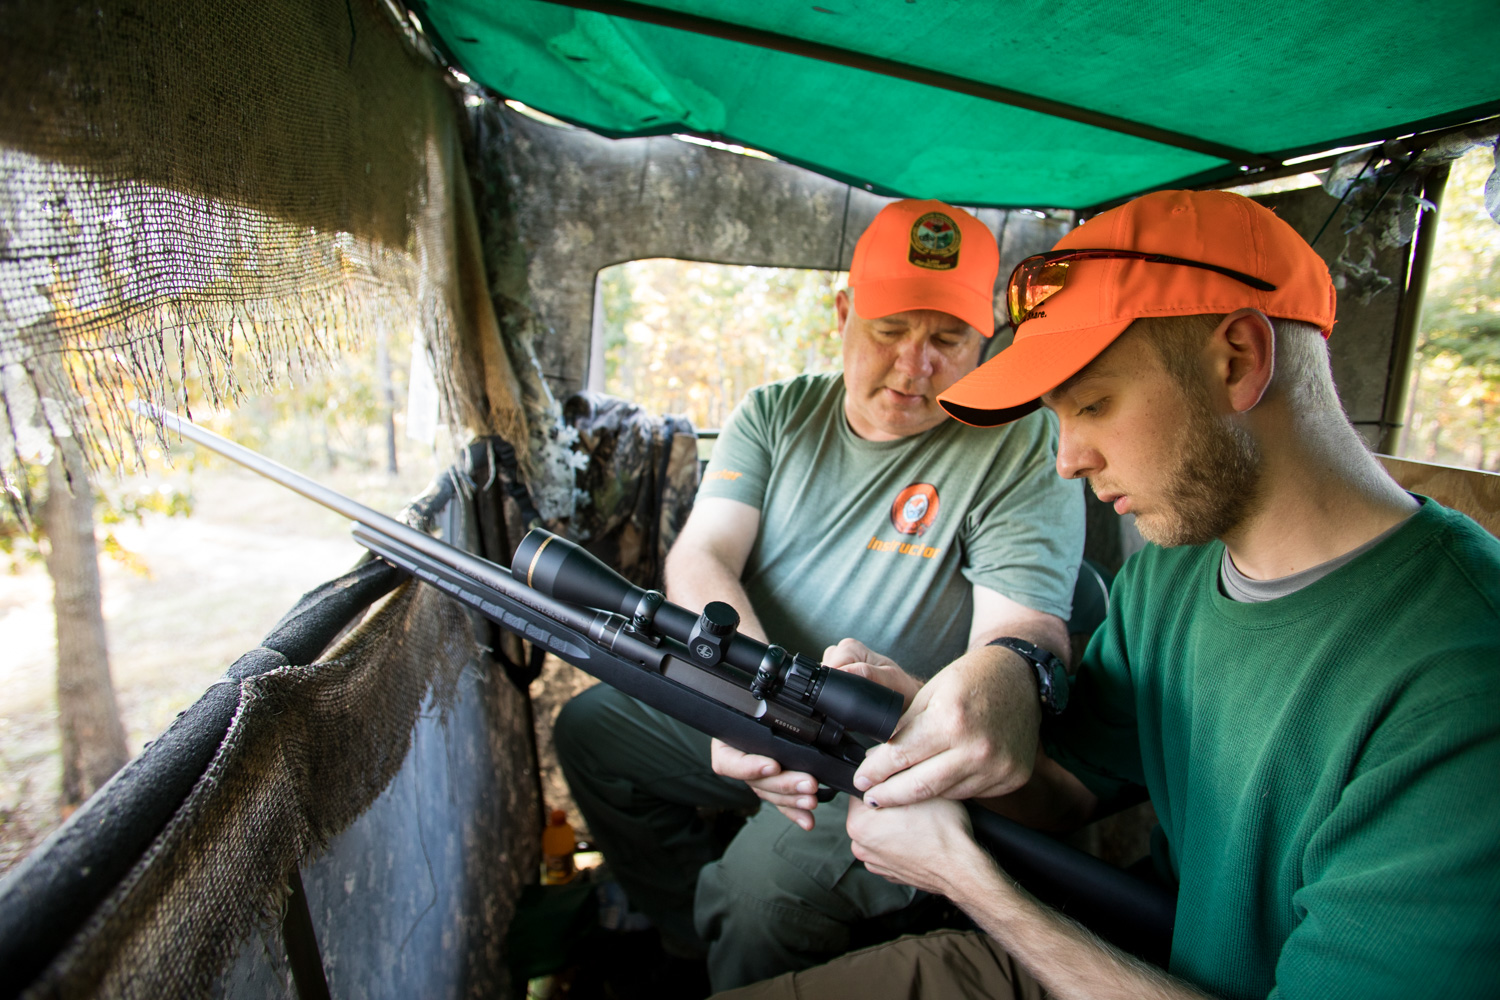 mentor showing a new hunter how to use a rifle